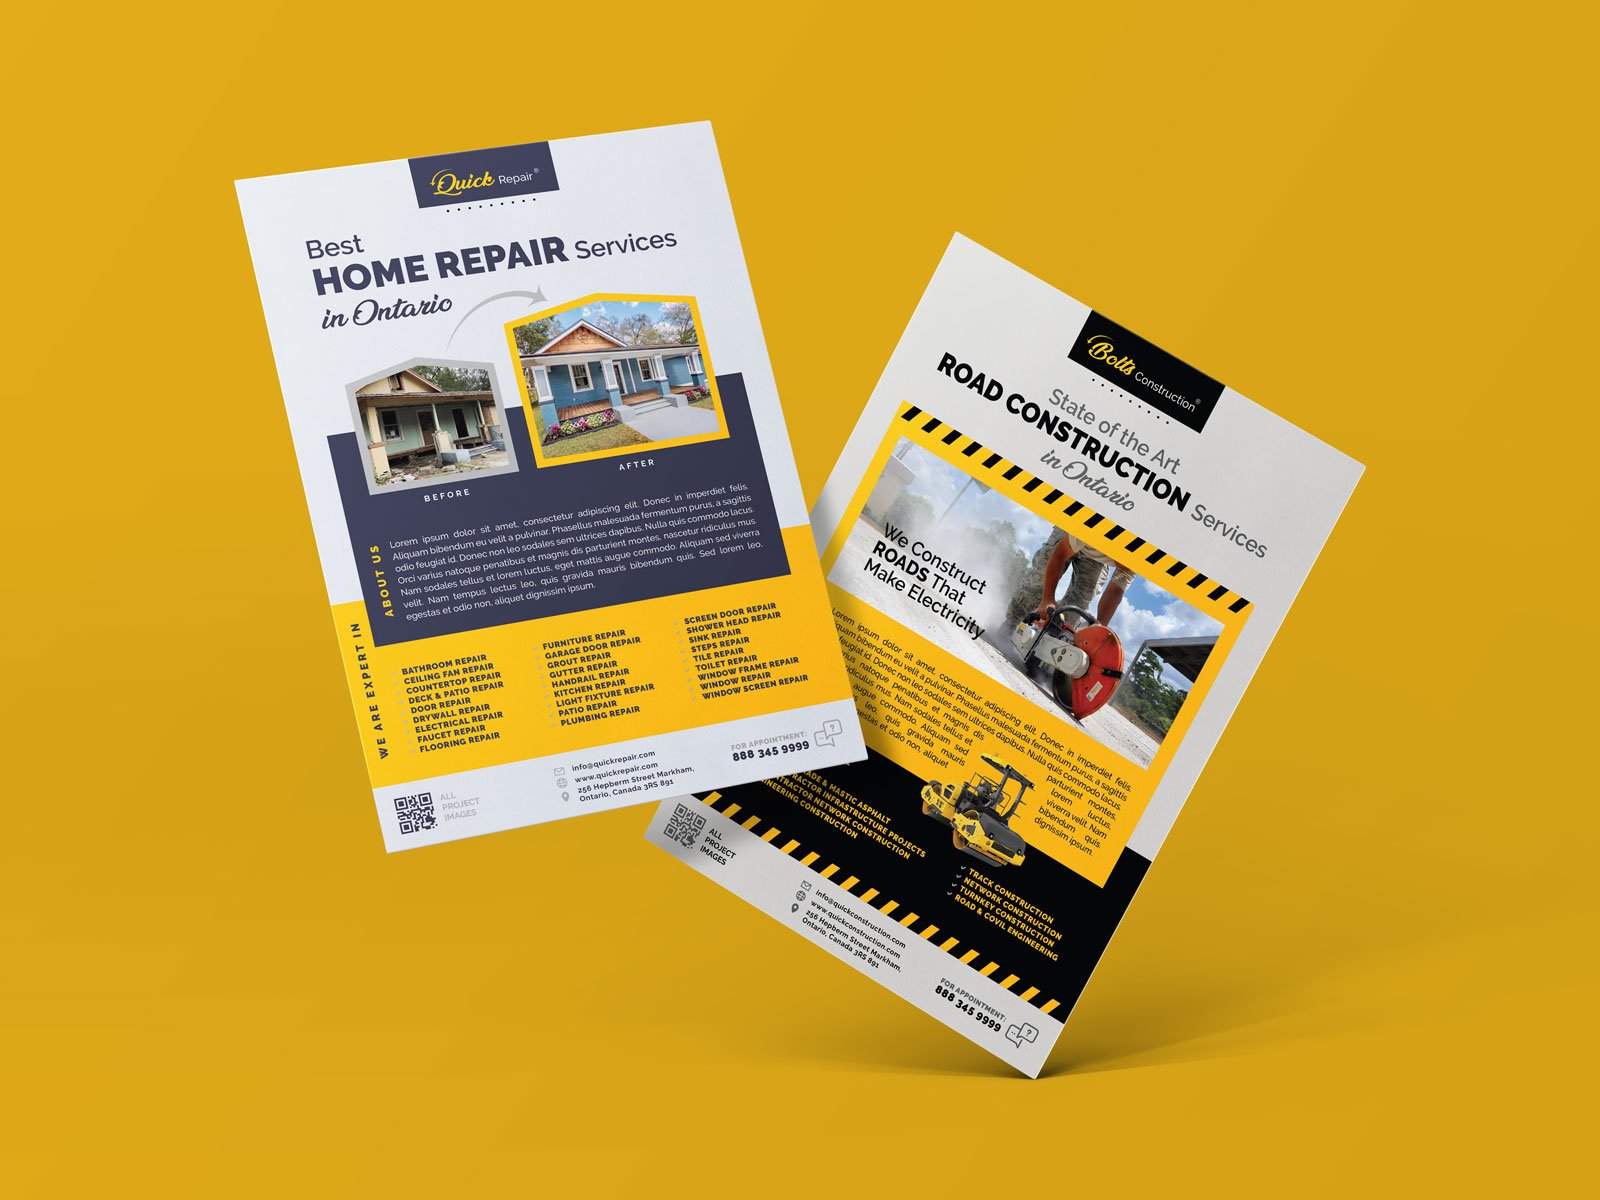 2 Free Road Construction Home Repair Services Flyer Design Templates In Ai Designbolts